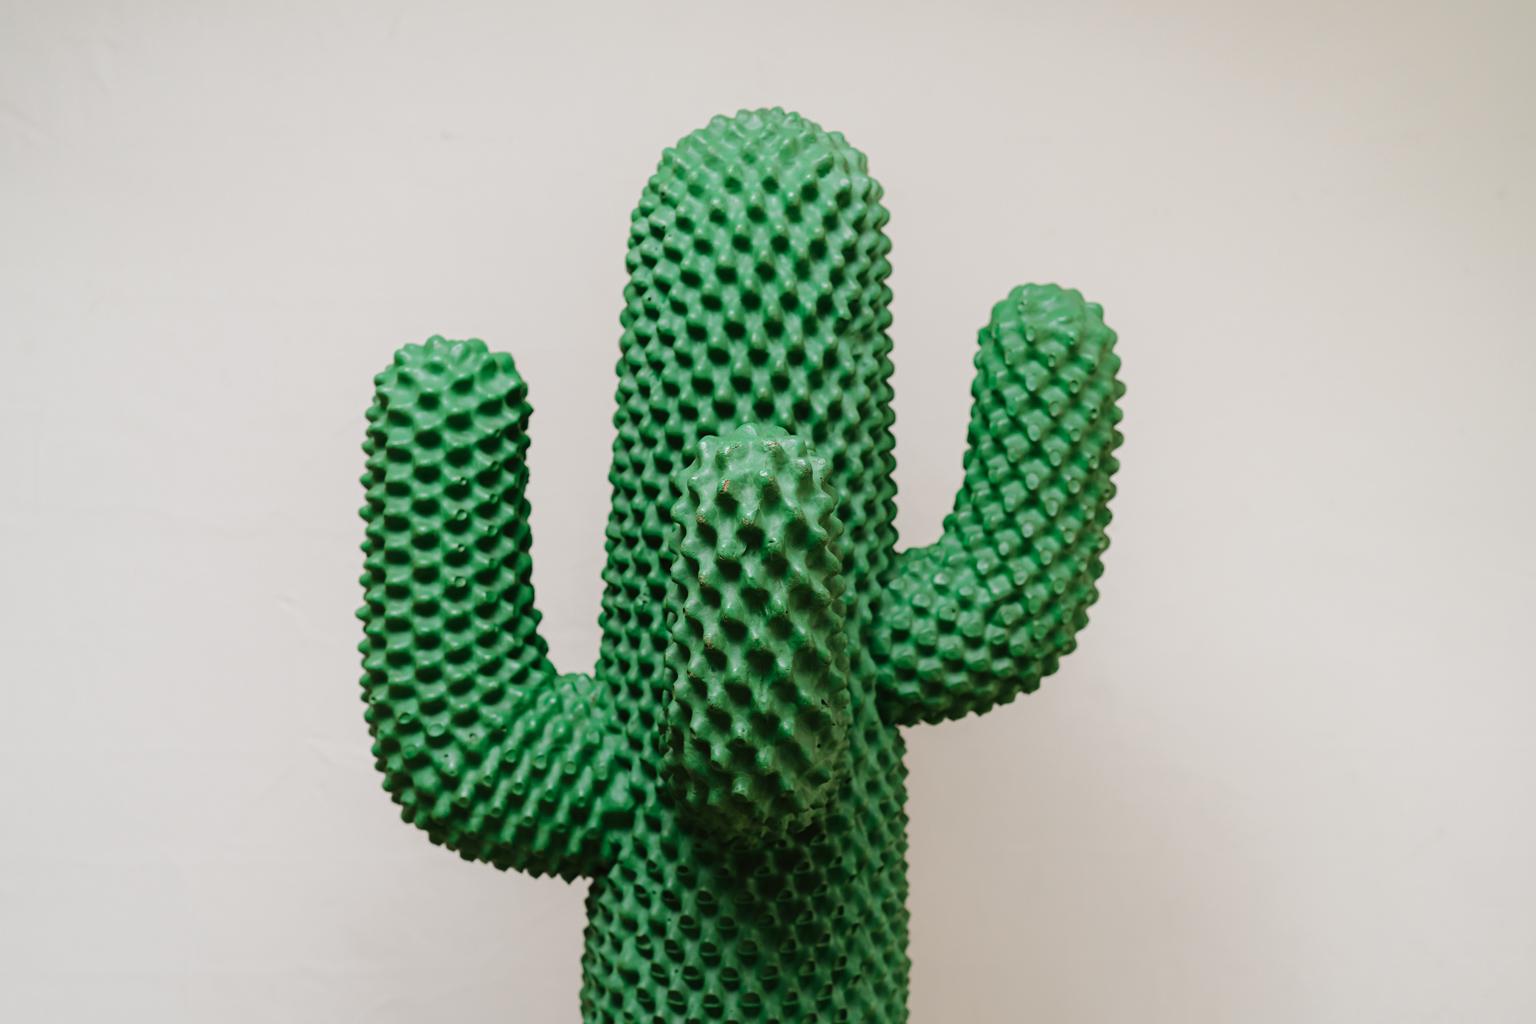 Cactus sculptural coat rack in polyurethane foam. Originally designed by Guido Drocco and Franco Mello,
produced by Gufram, Italy, 1972. This one was bought in the 1970s by a Belgian family and has been in their house until now. A very early